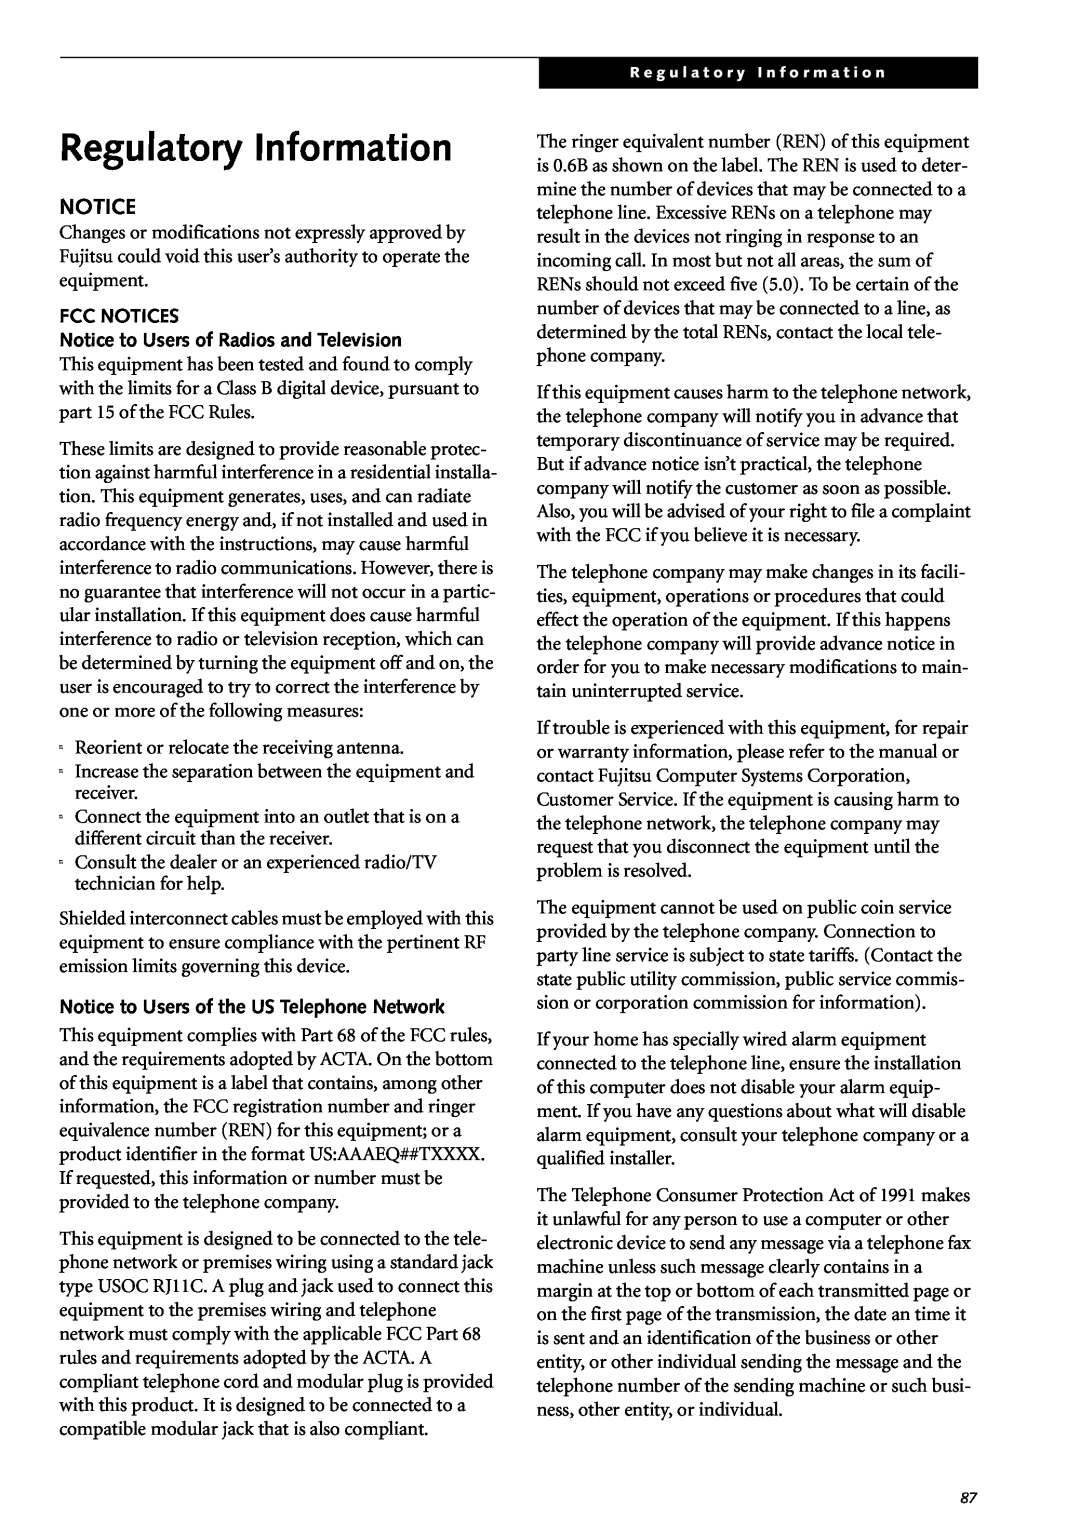 Fujitsu Siemens Computers S2210 manual Regulatory Information, FCC NOTICES Notice to Users of Radios and Television 